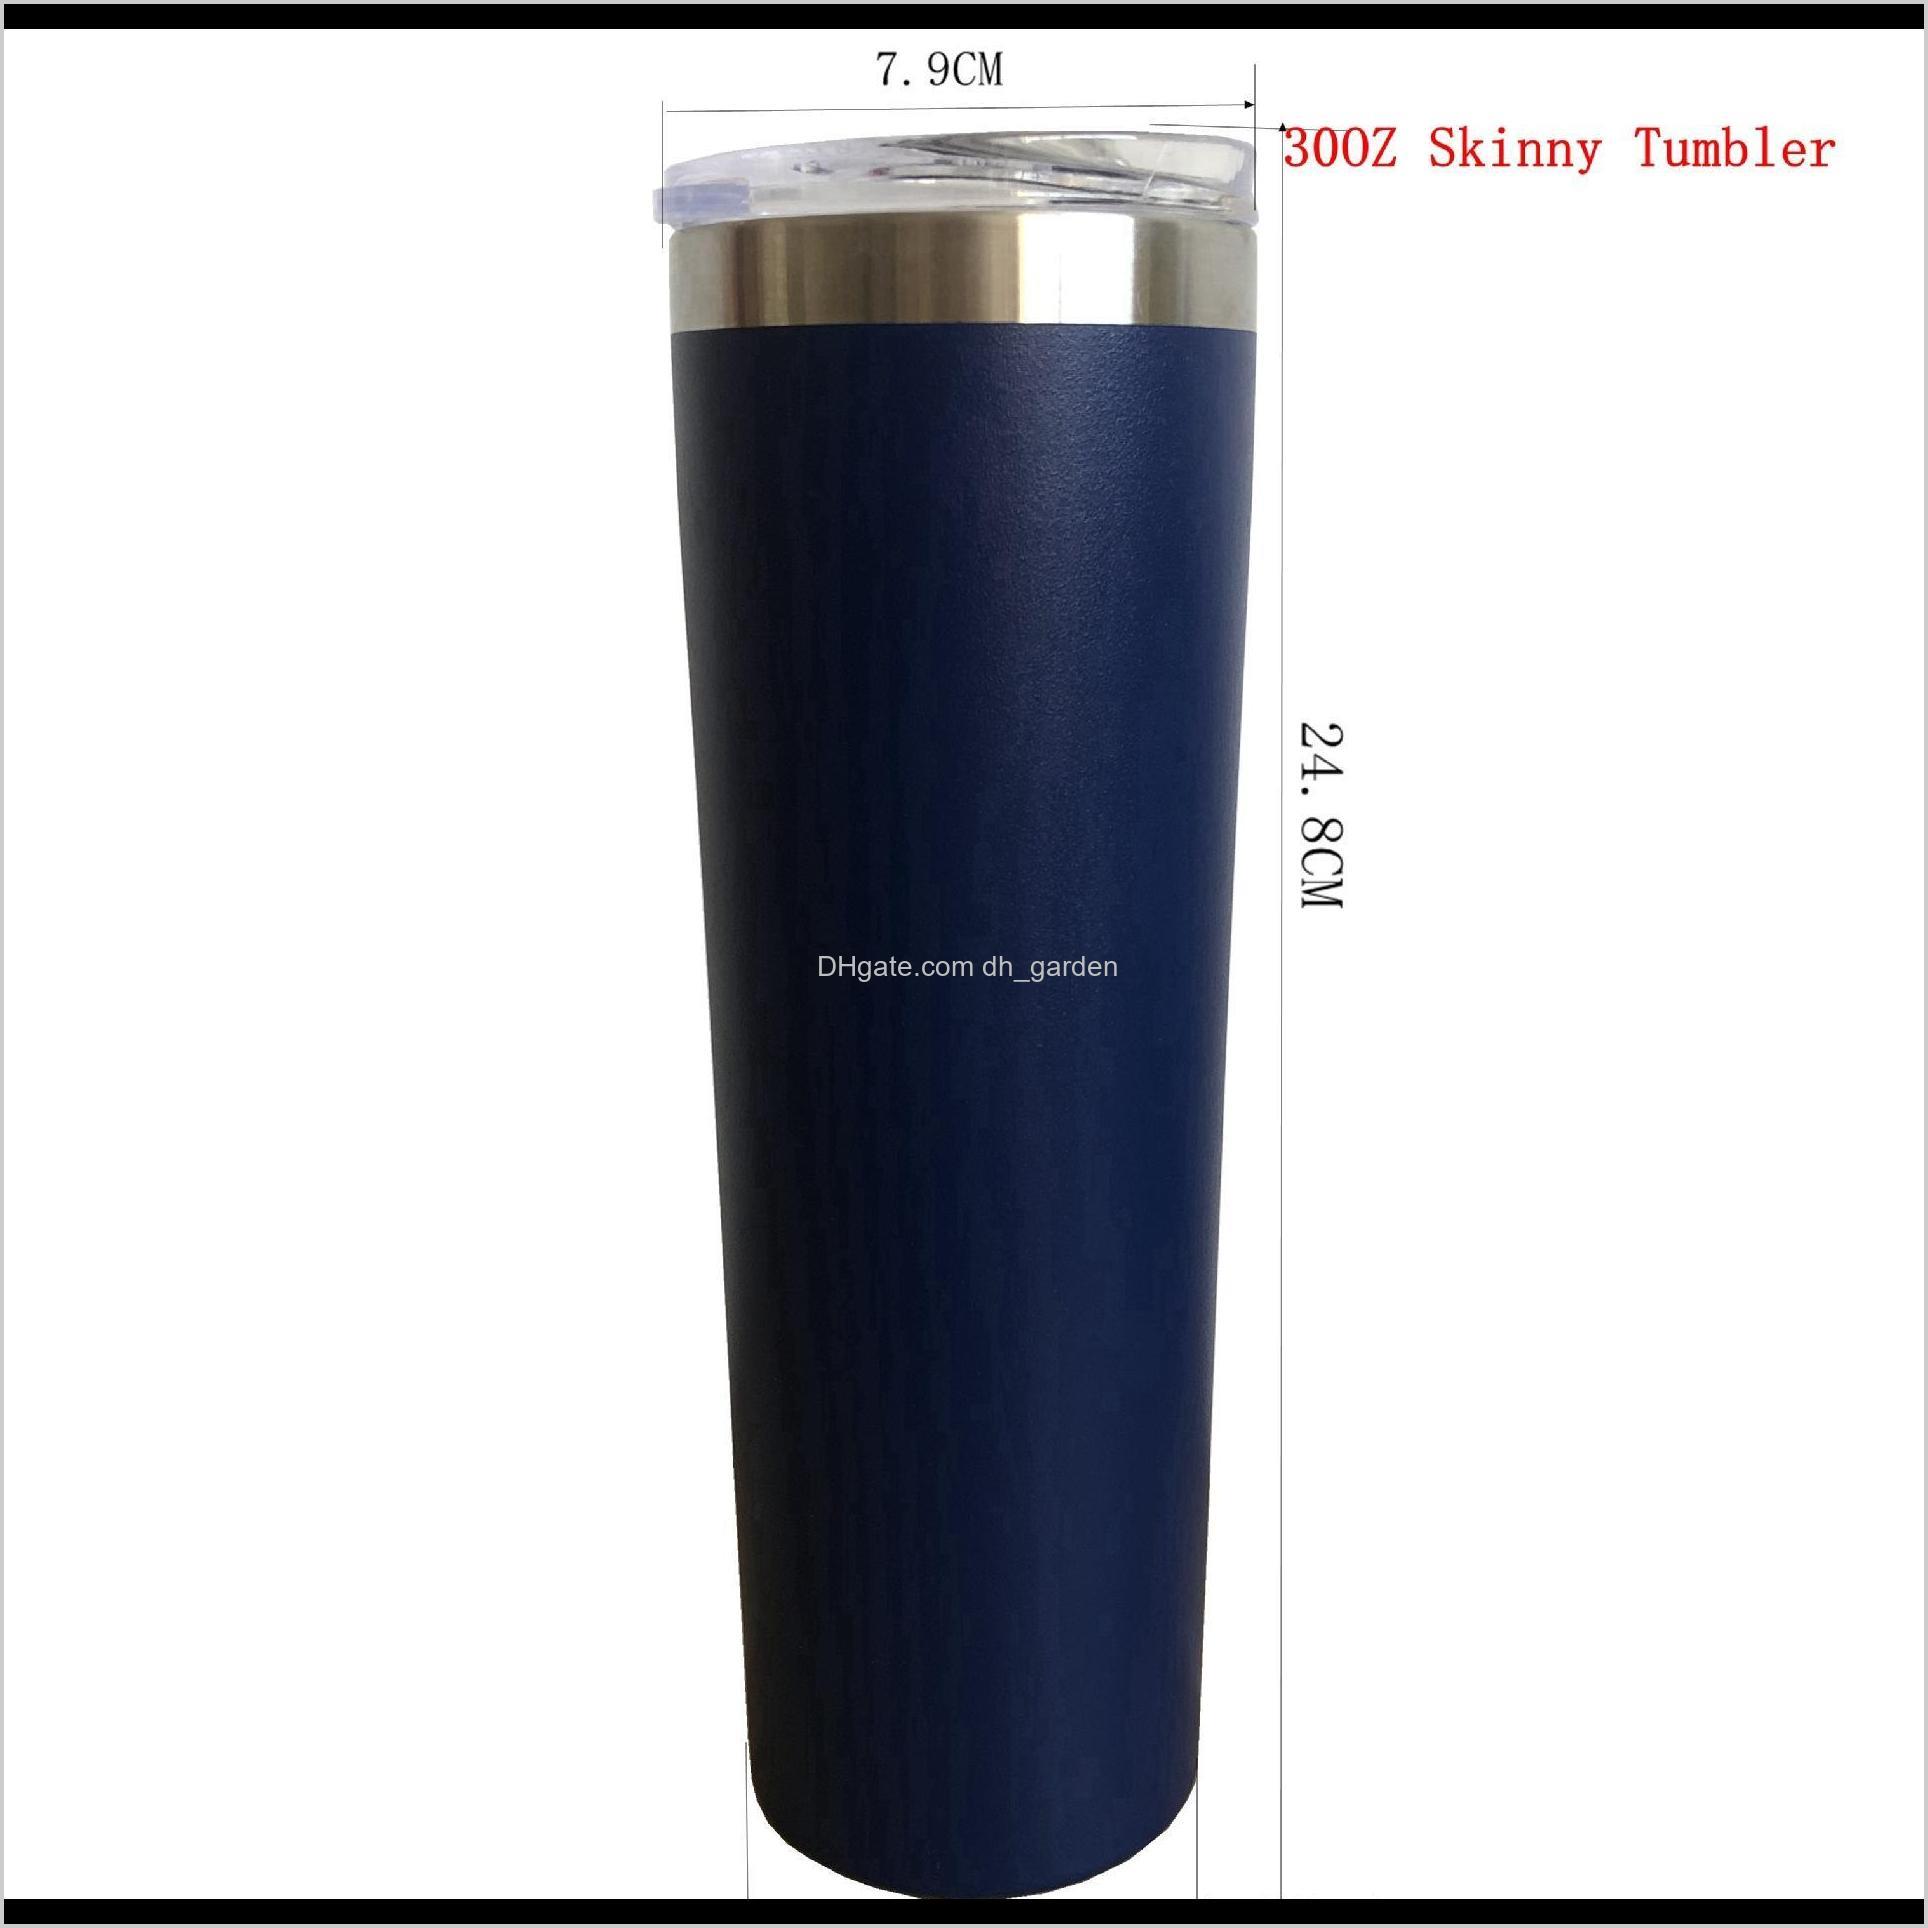 

20Oz 30Oz Skinny Tumbler Double Wall Stainless Steel Vacuum Tumbler Insulated Straight Car Cups Flask Beer Portable Coffee Mugs Qjdpw Iapwe, As pic;with logo